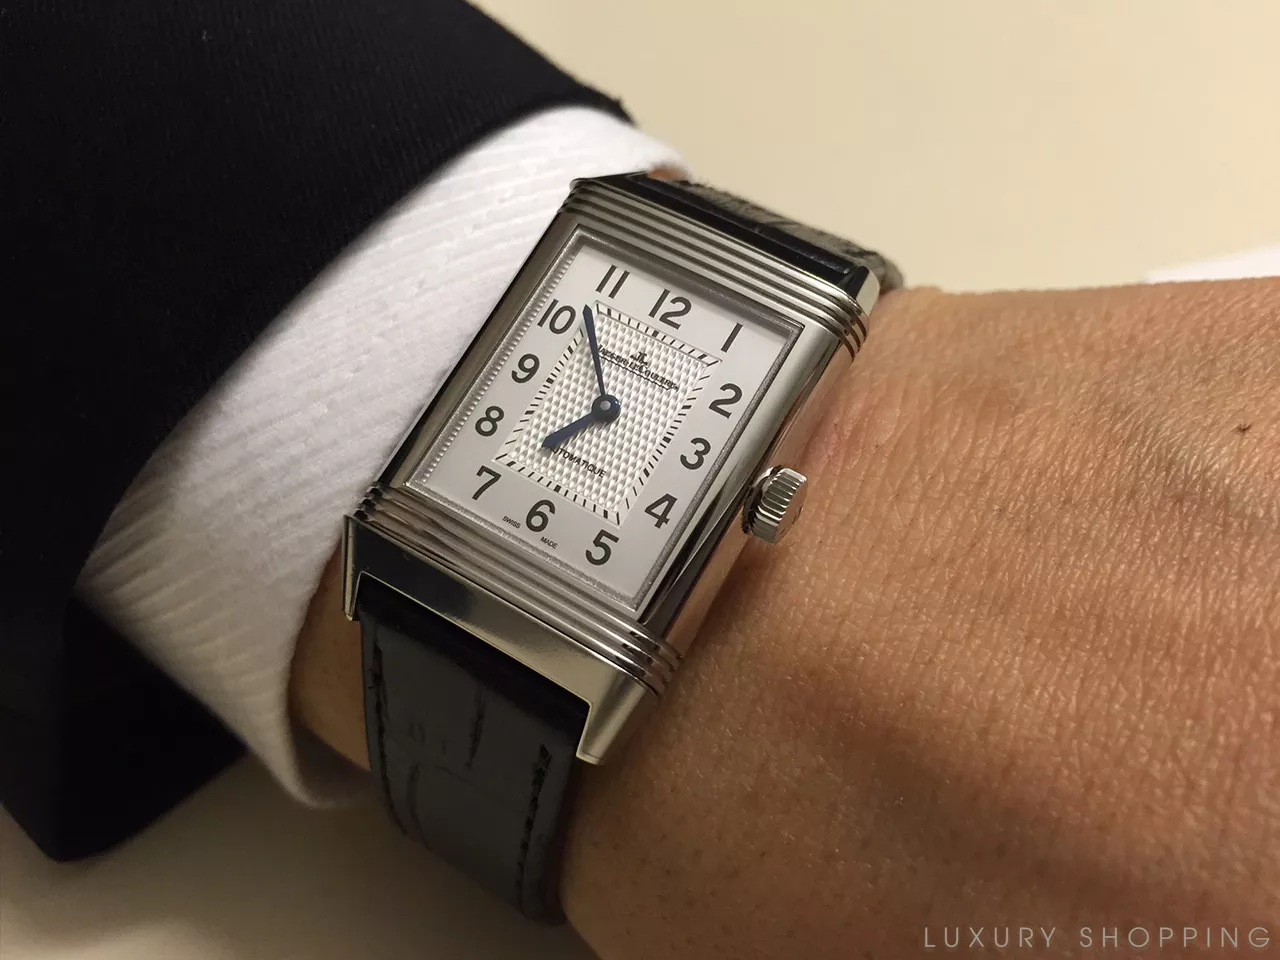 Jaeger-LeCoultre Reverso 2538420 Watch 40.1 x 24.4